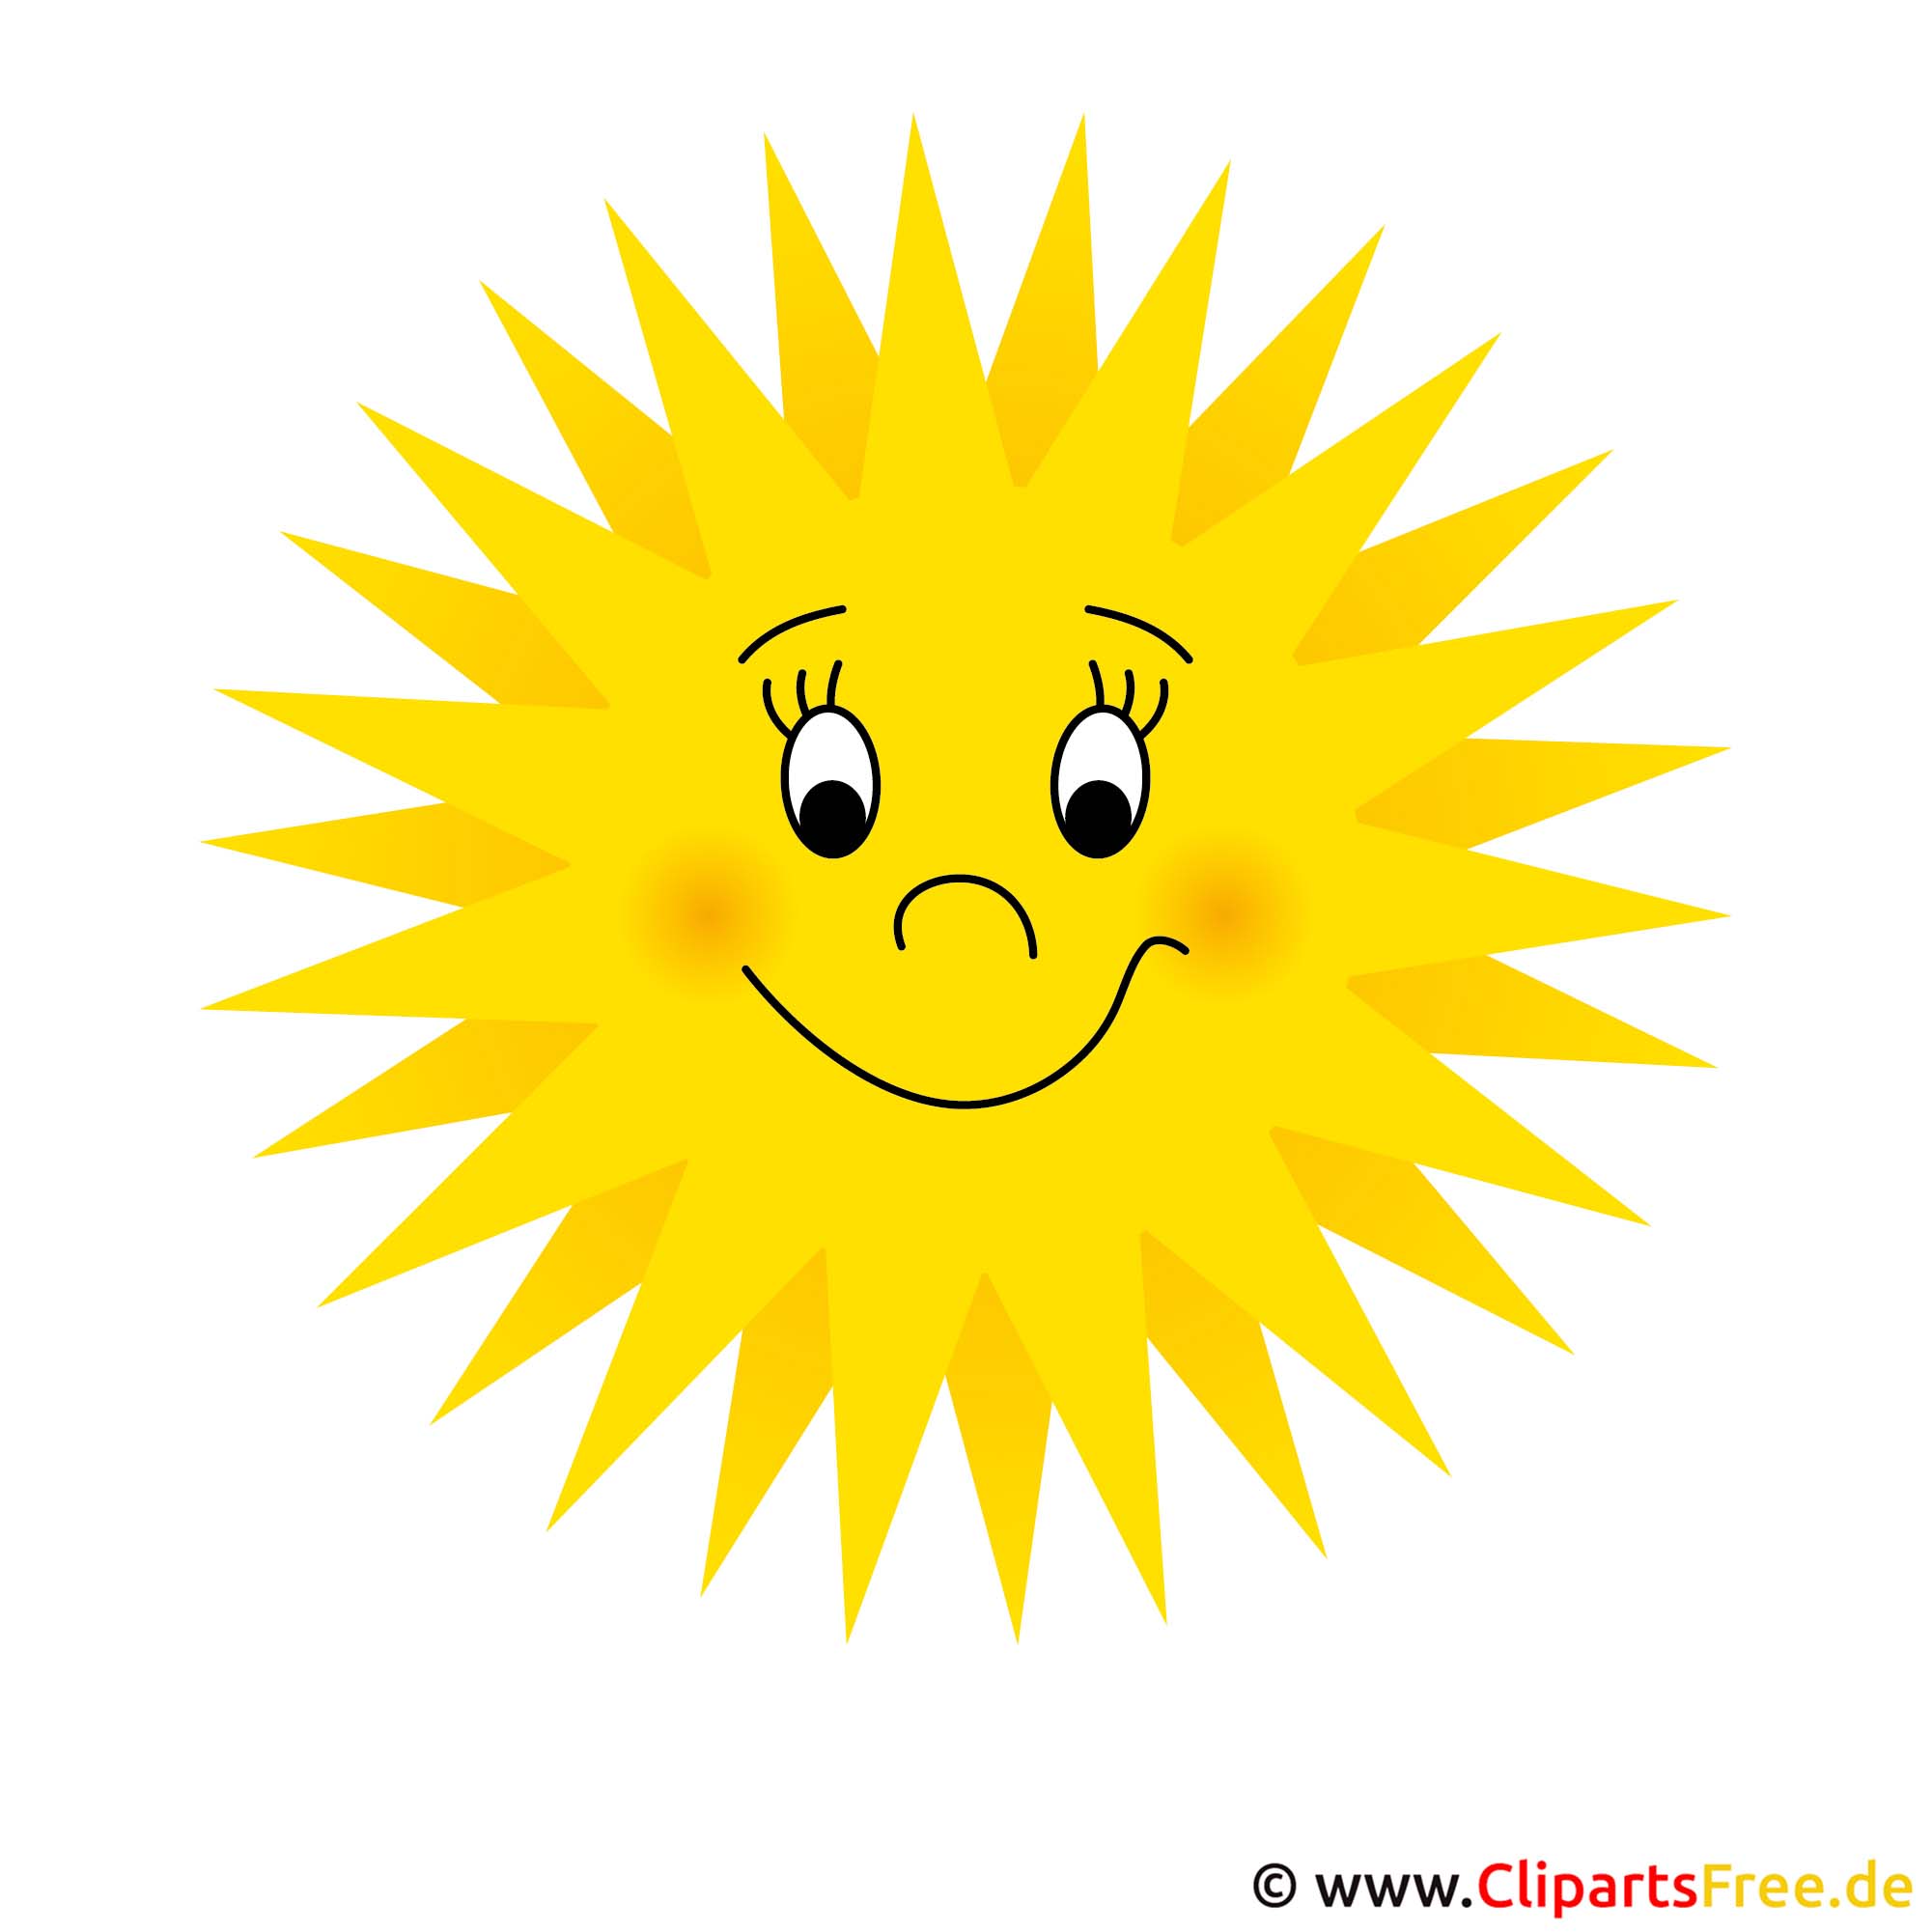 om clipart free download - photo #40